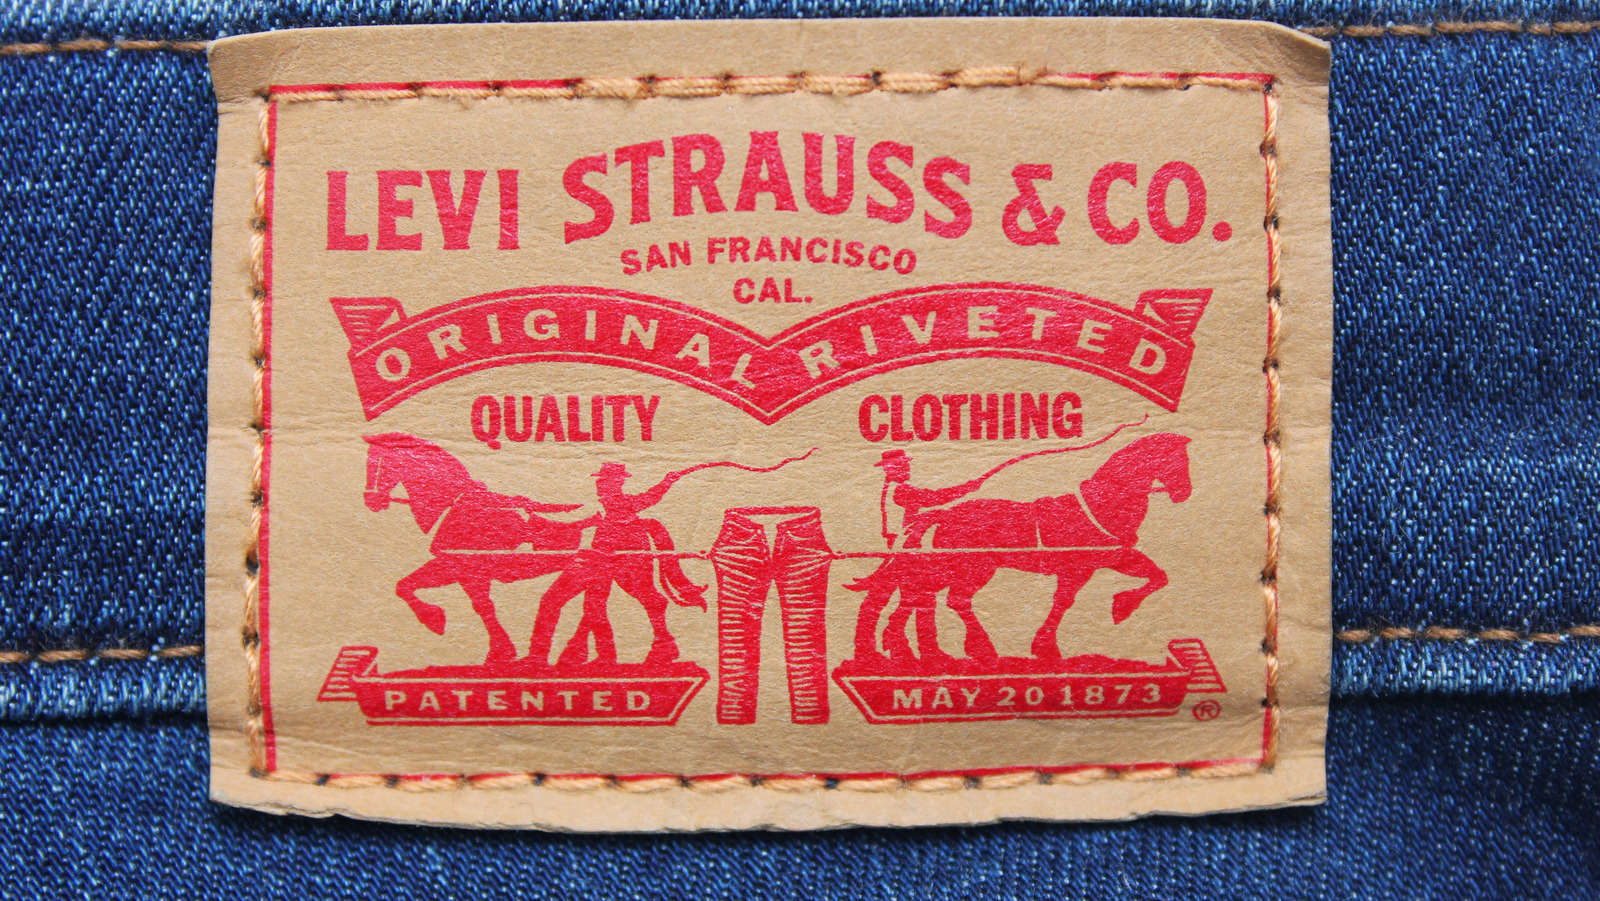 Where Is Levi Strauss Buried?